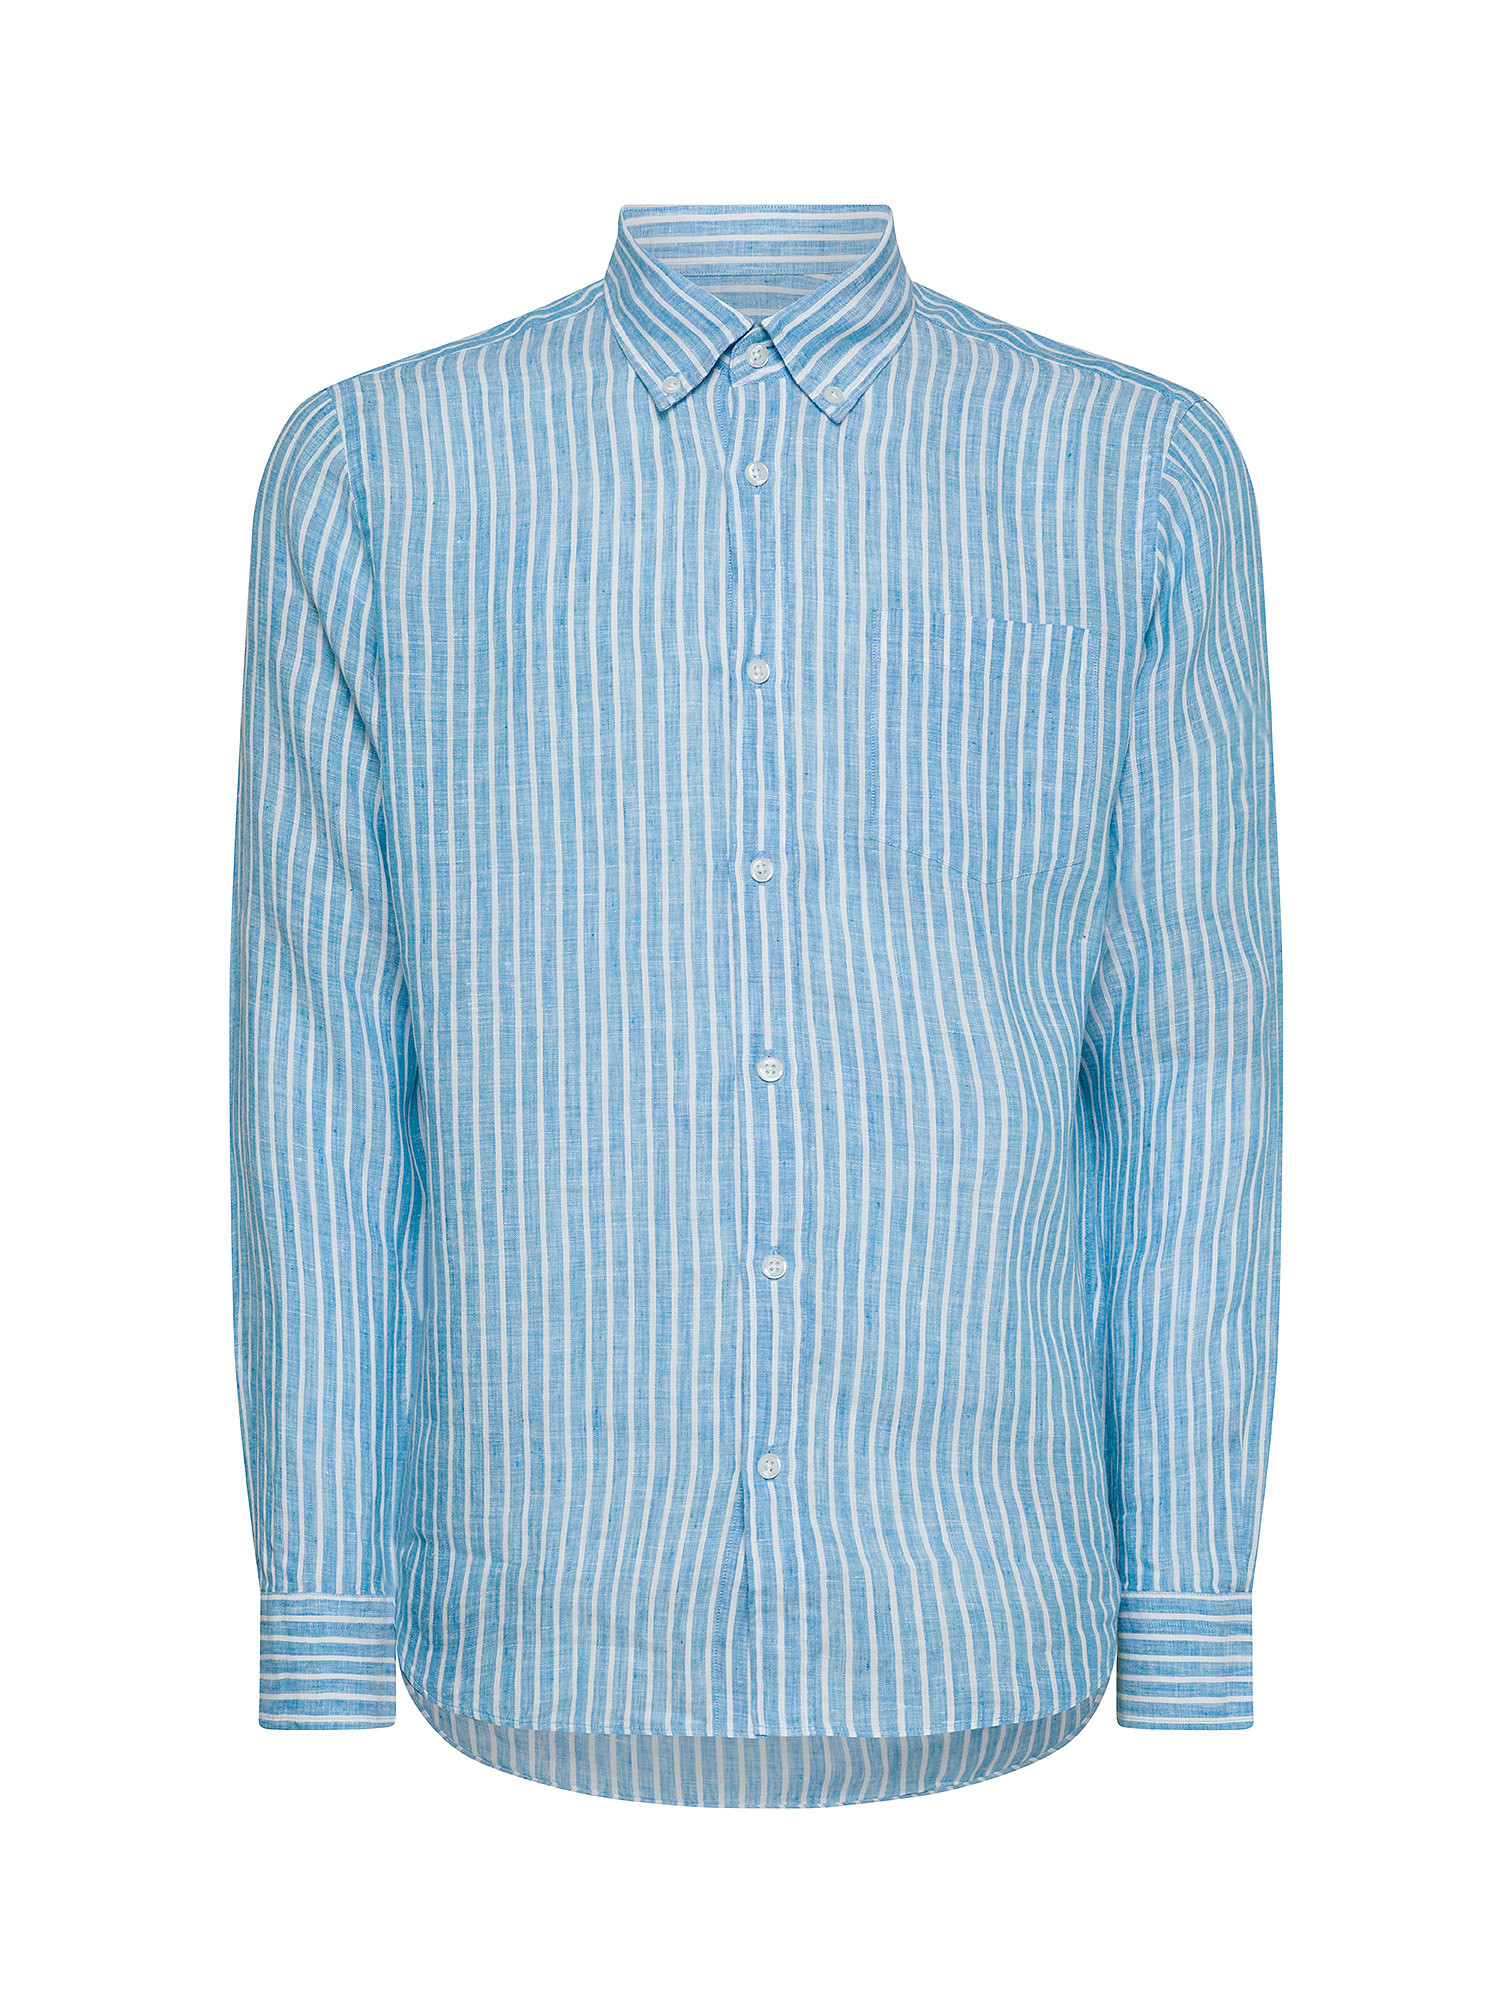 Luca D'Altieri - Tailor fit shirt in pure linen, Turquoise, large image number 0